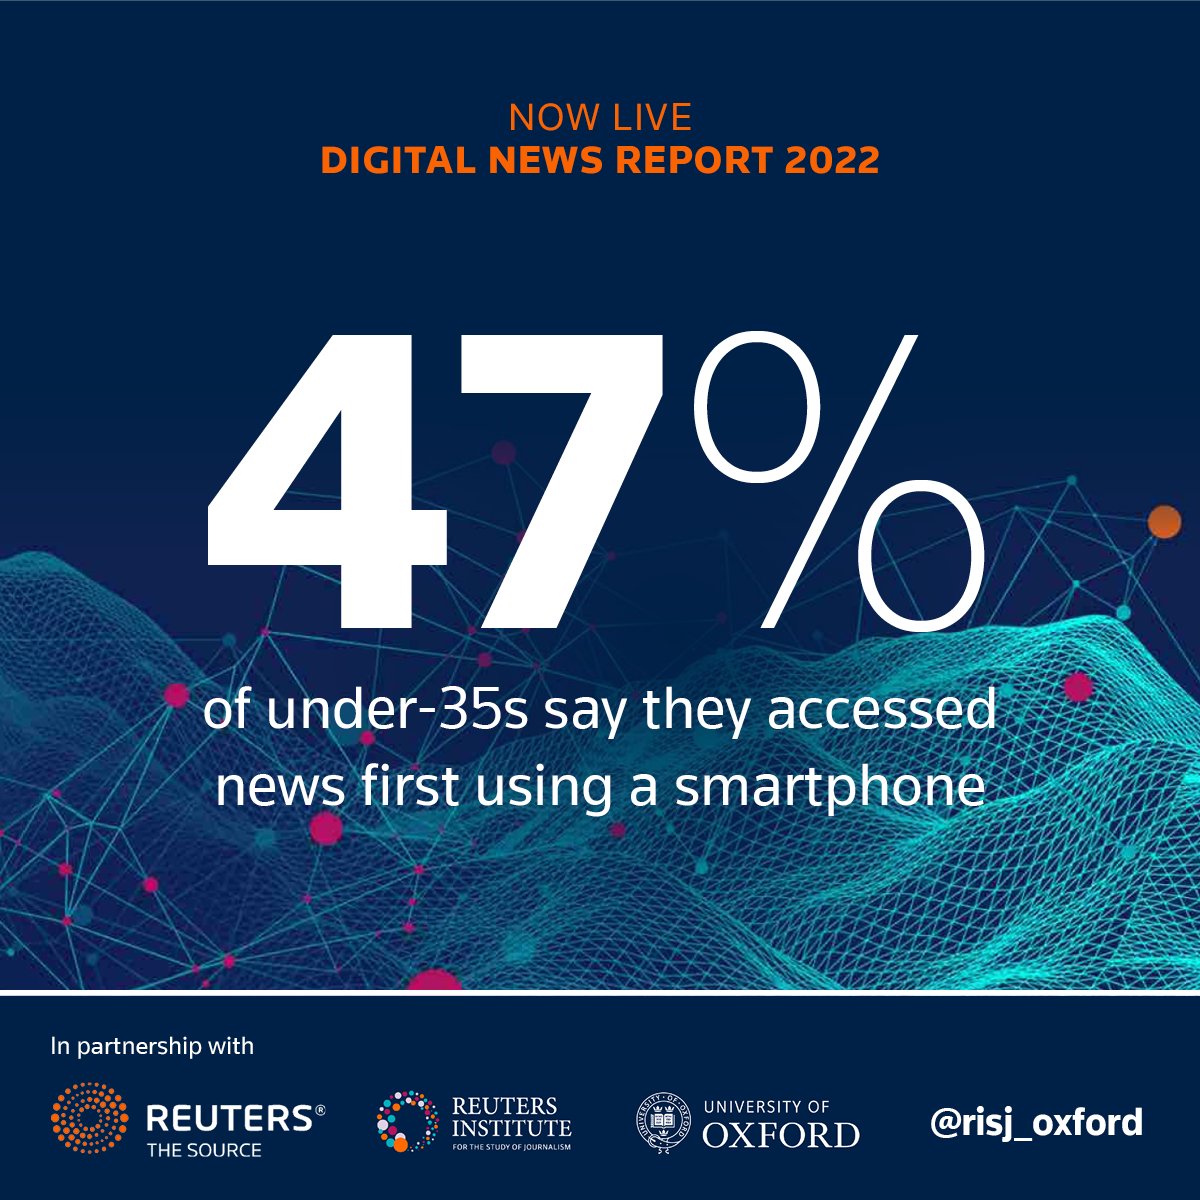 How do you like your news in the morning? Smartphones surge ahead for the under-35s. In an increasin...